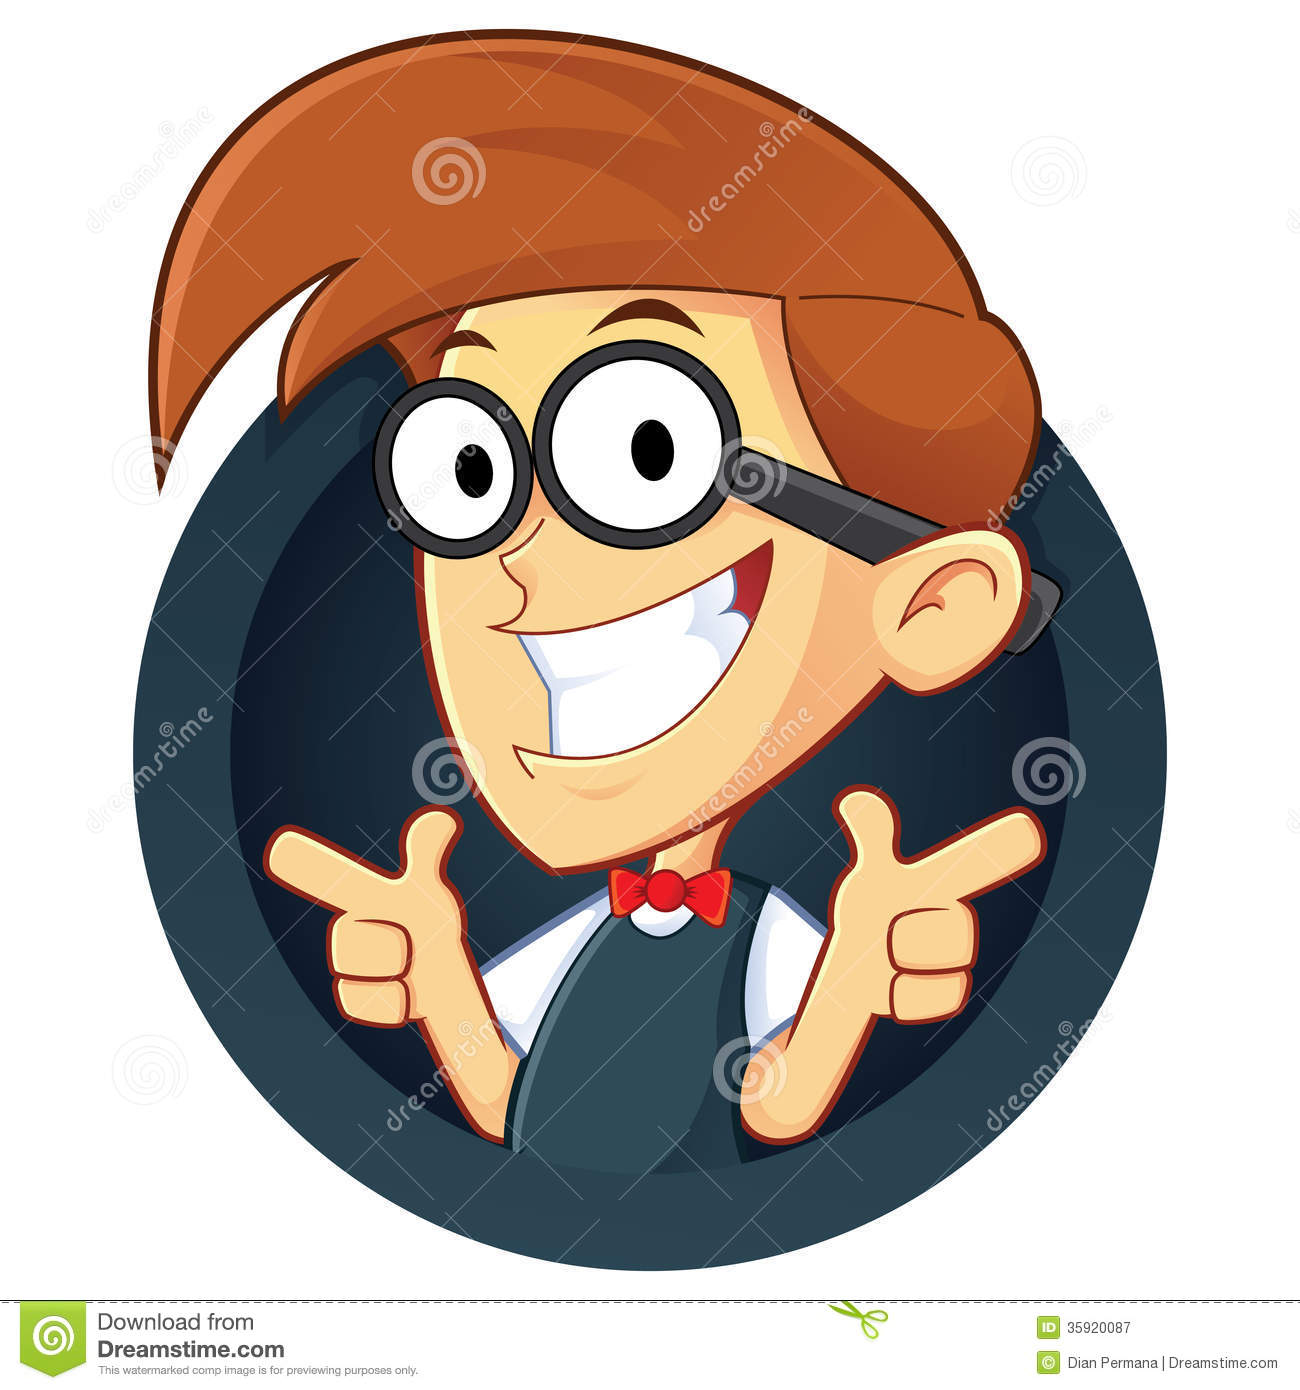 Nerd Geek With Two Gun Finger Gesture Royalty Free Stock Photography